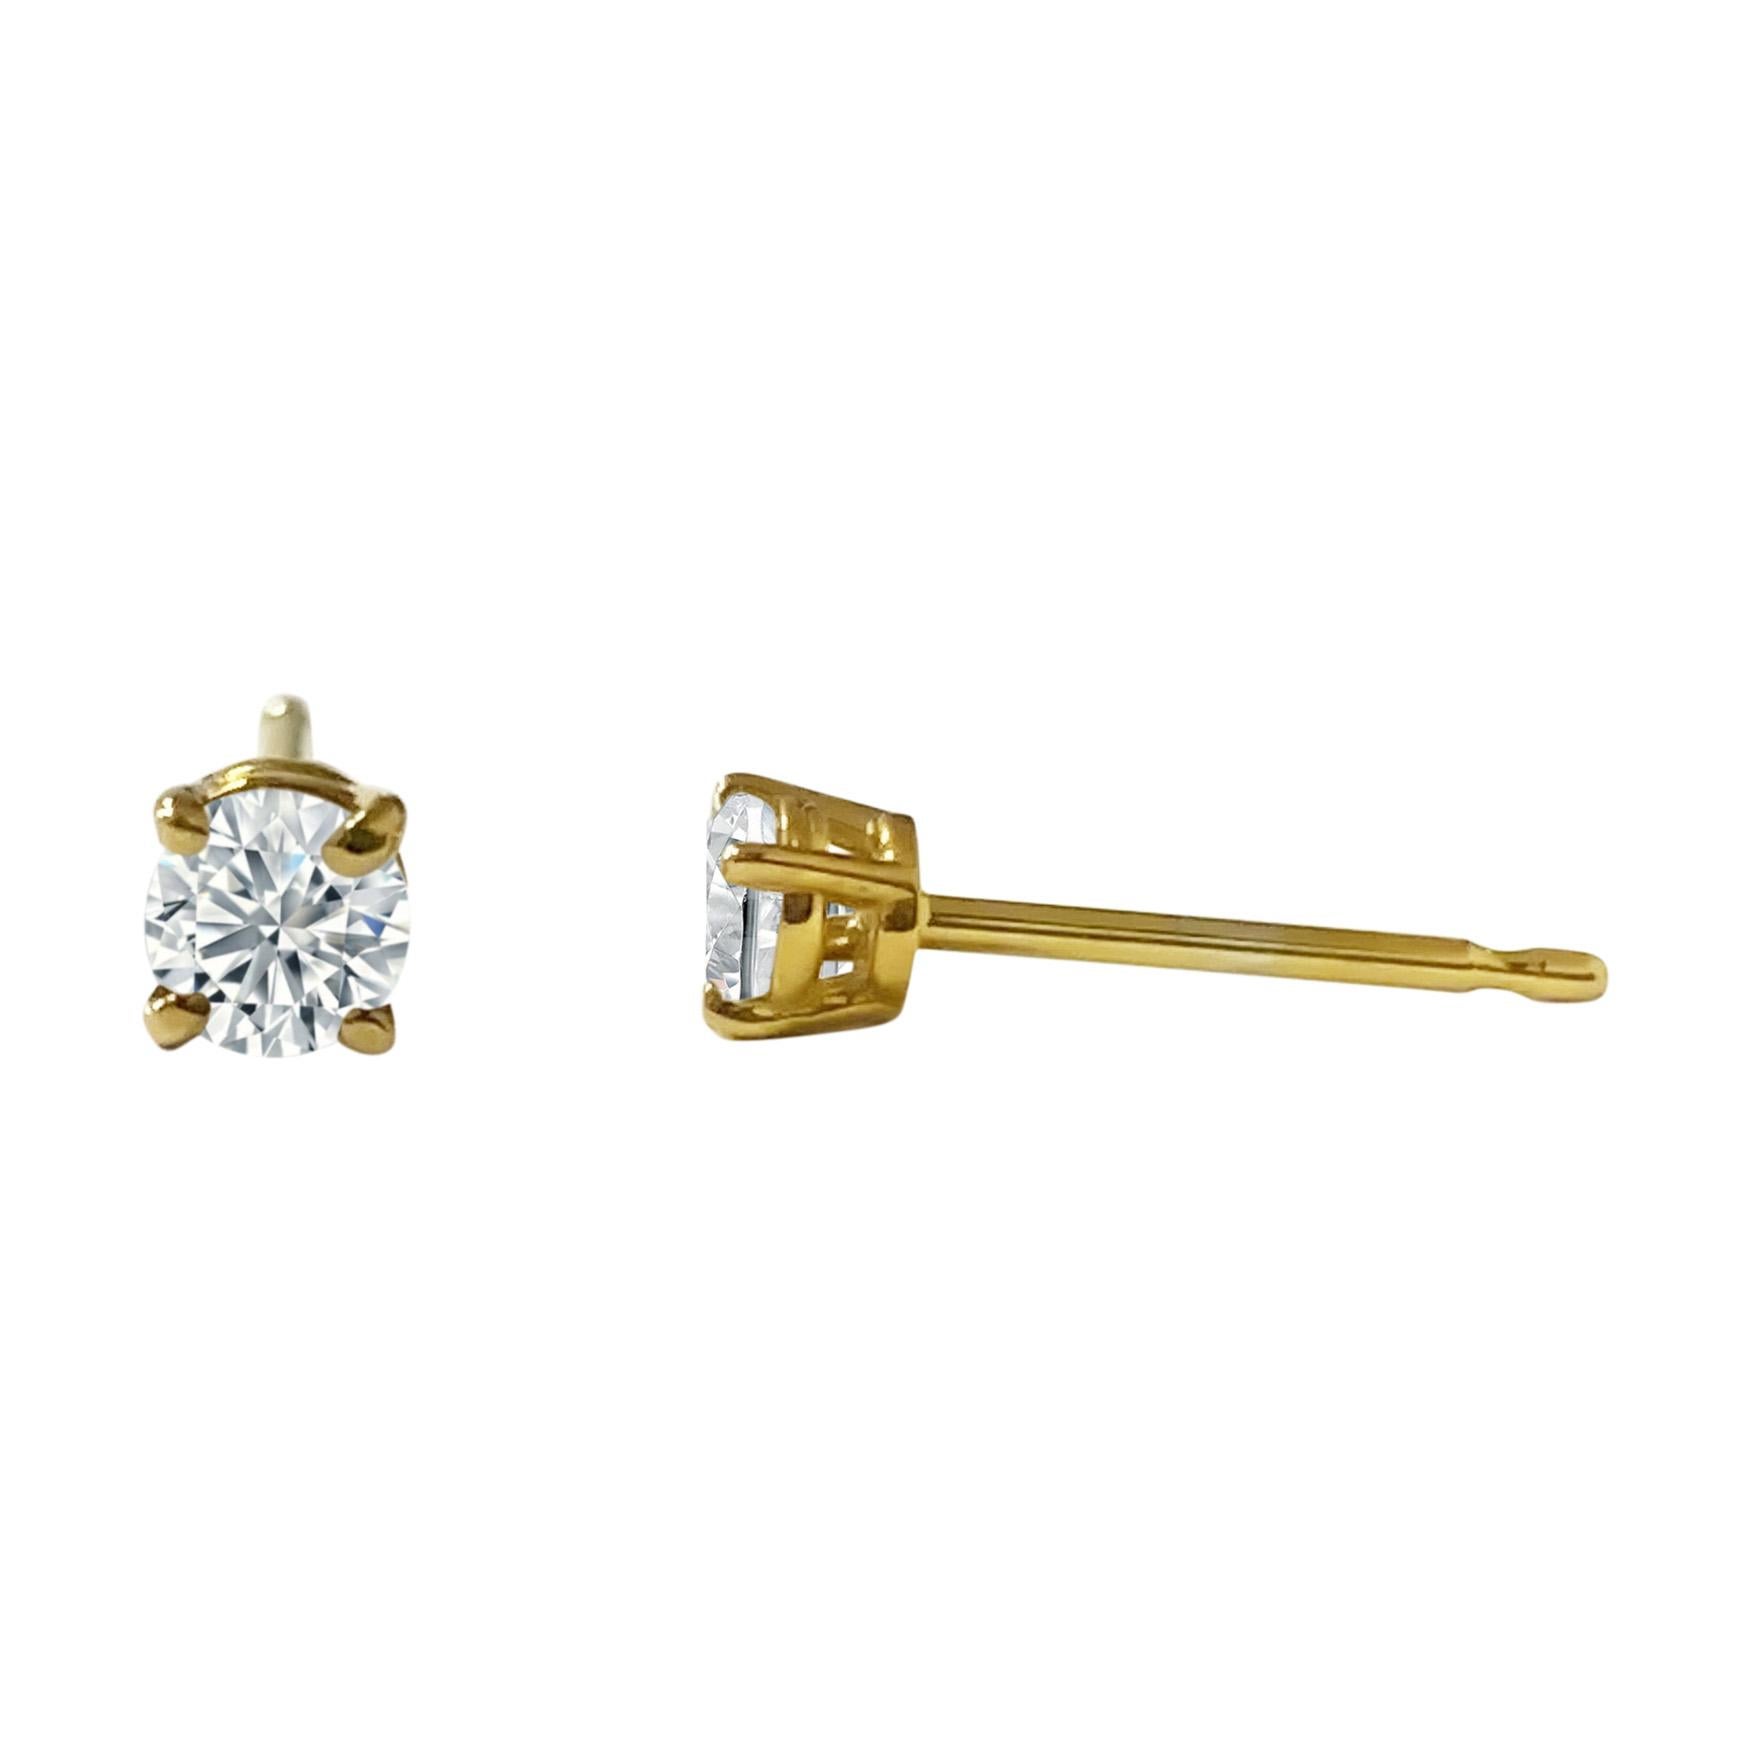 Crafted from lustrous 14k yellow gold, these stunning stud earrings feature sparkling round brilliant cut diamonds totaling 0.50 carats. With a beautiful H color and I1-2 clarity, these diamonds are 100% natural earth mined, adding a touch of